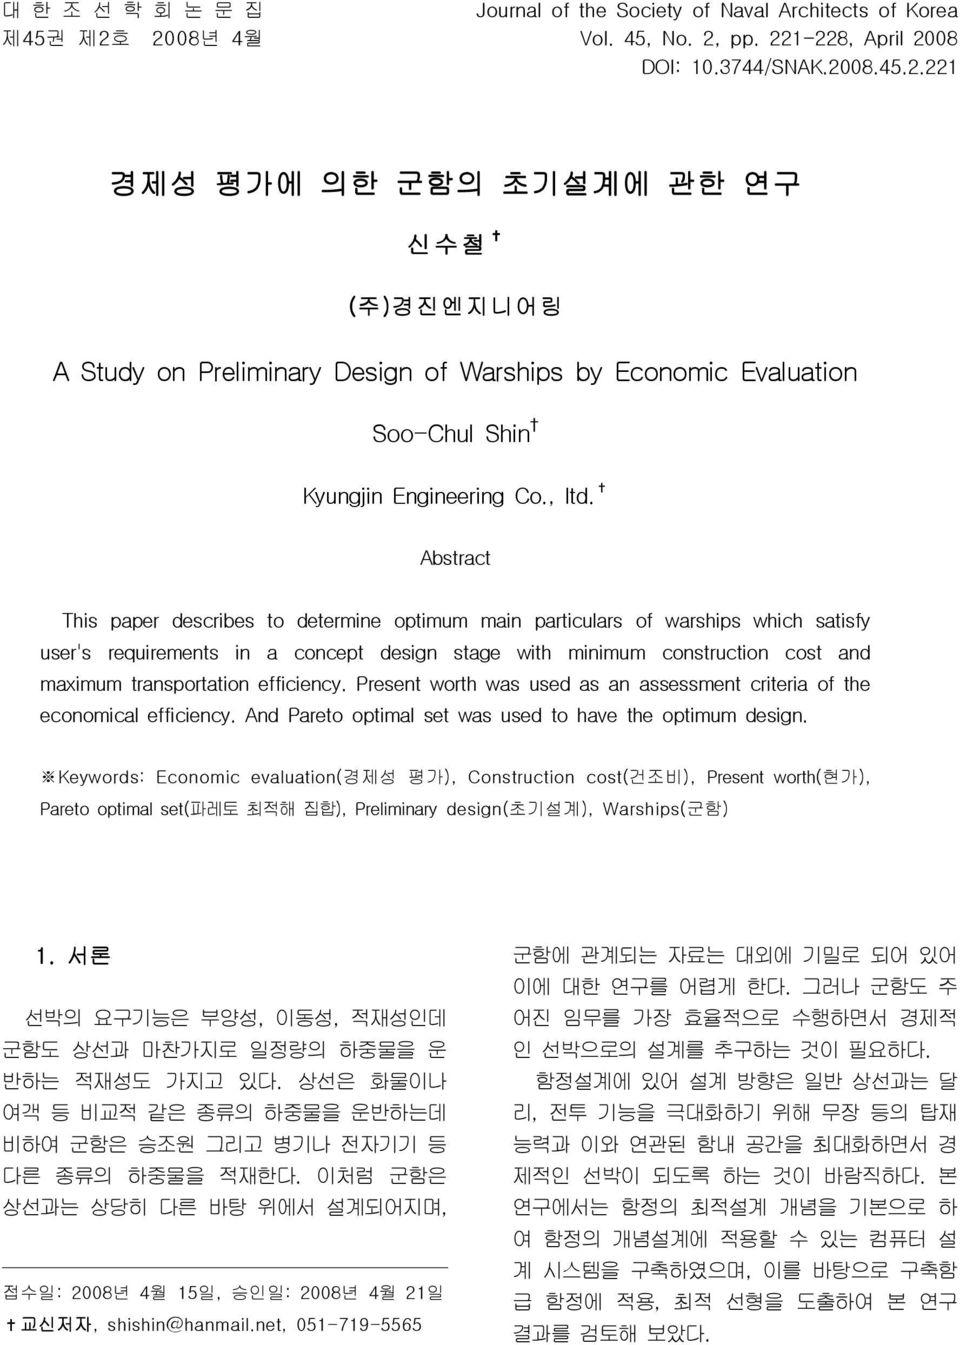 Abstract This paper describes to determine optimum main particulars of warships which satisfy user's requirements in a concept design stage with minimum construction cost and maximum transportation